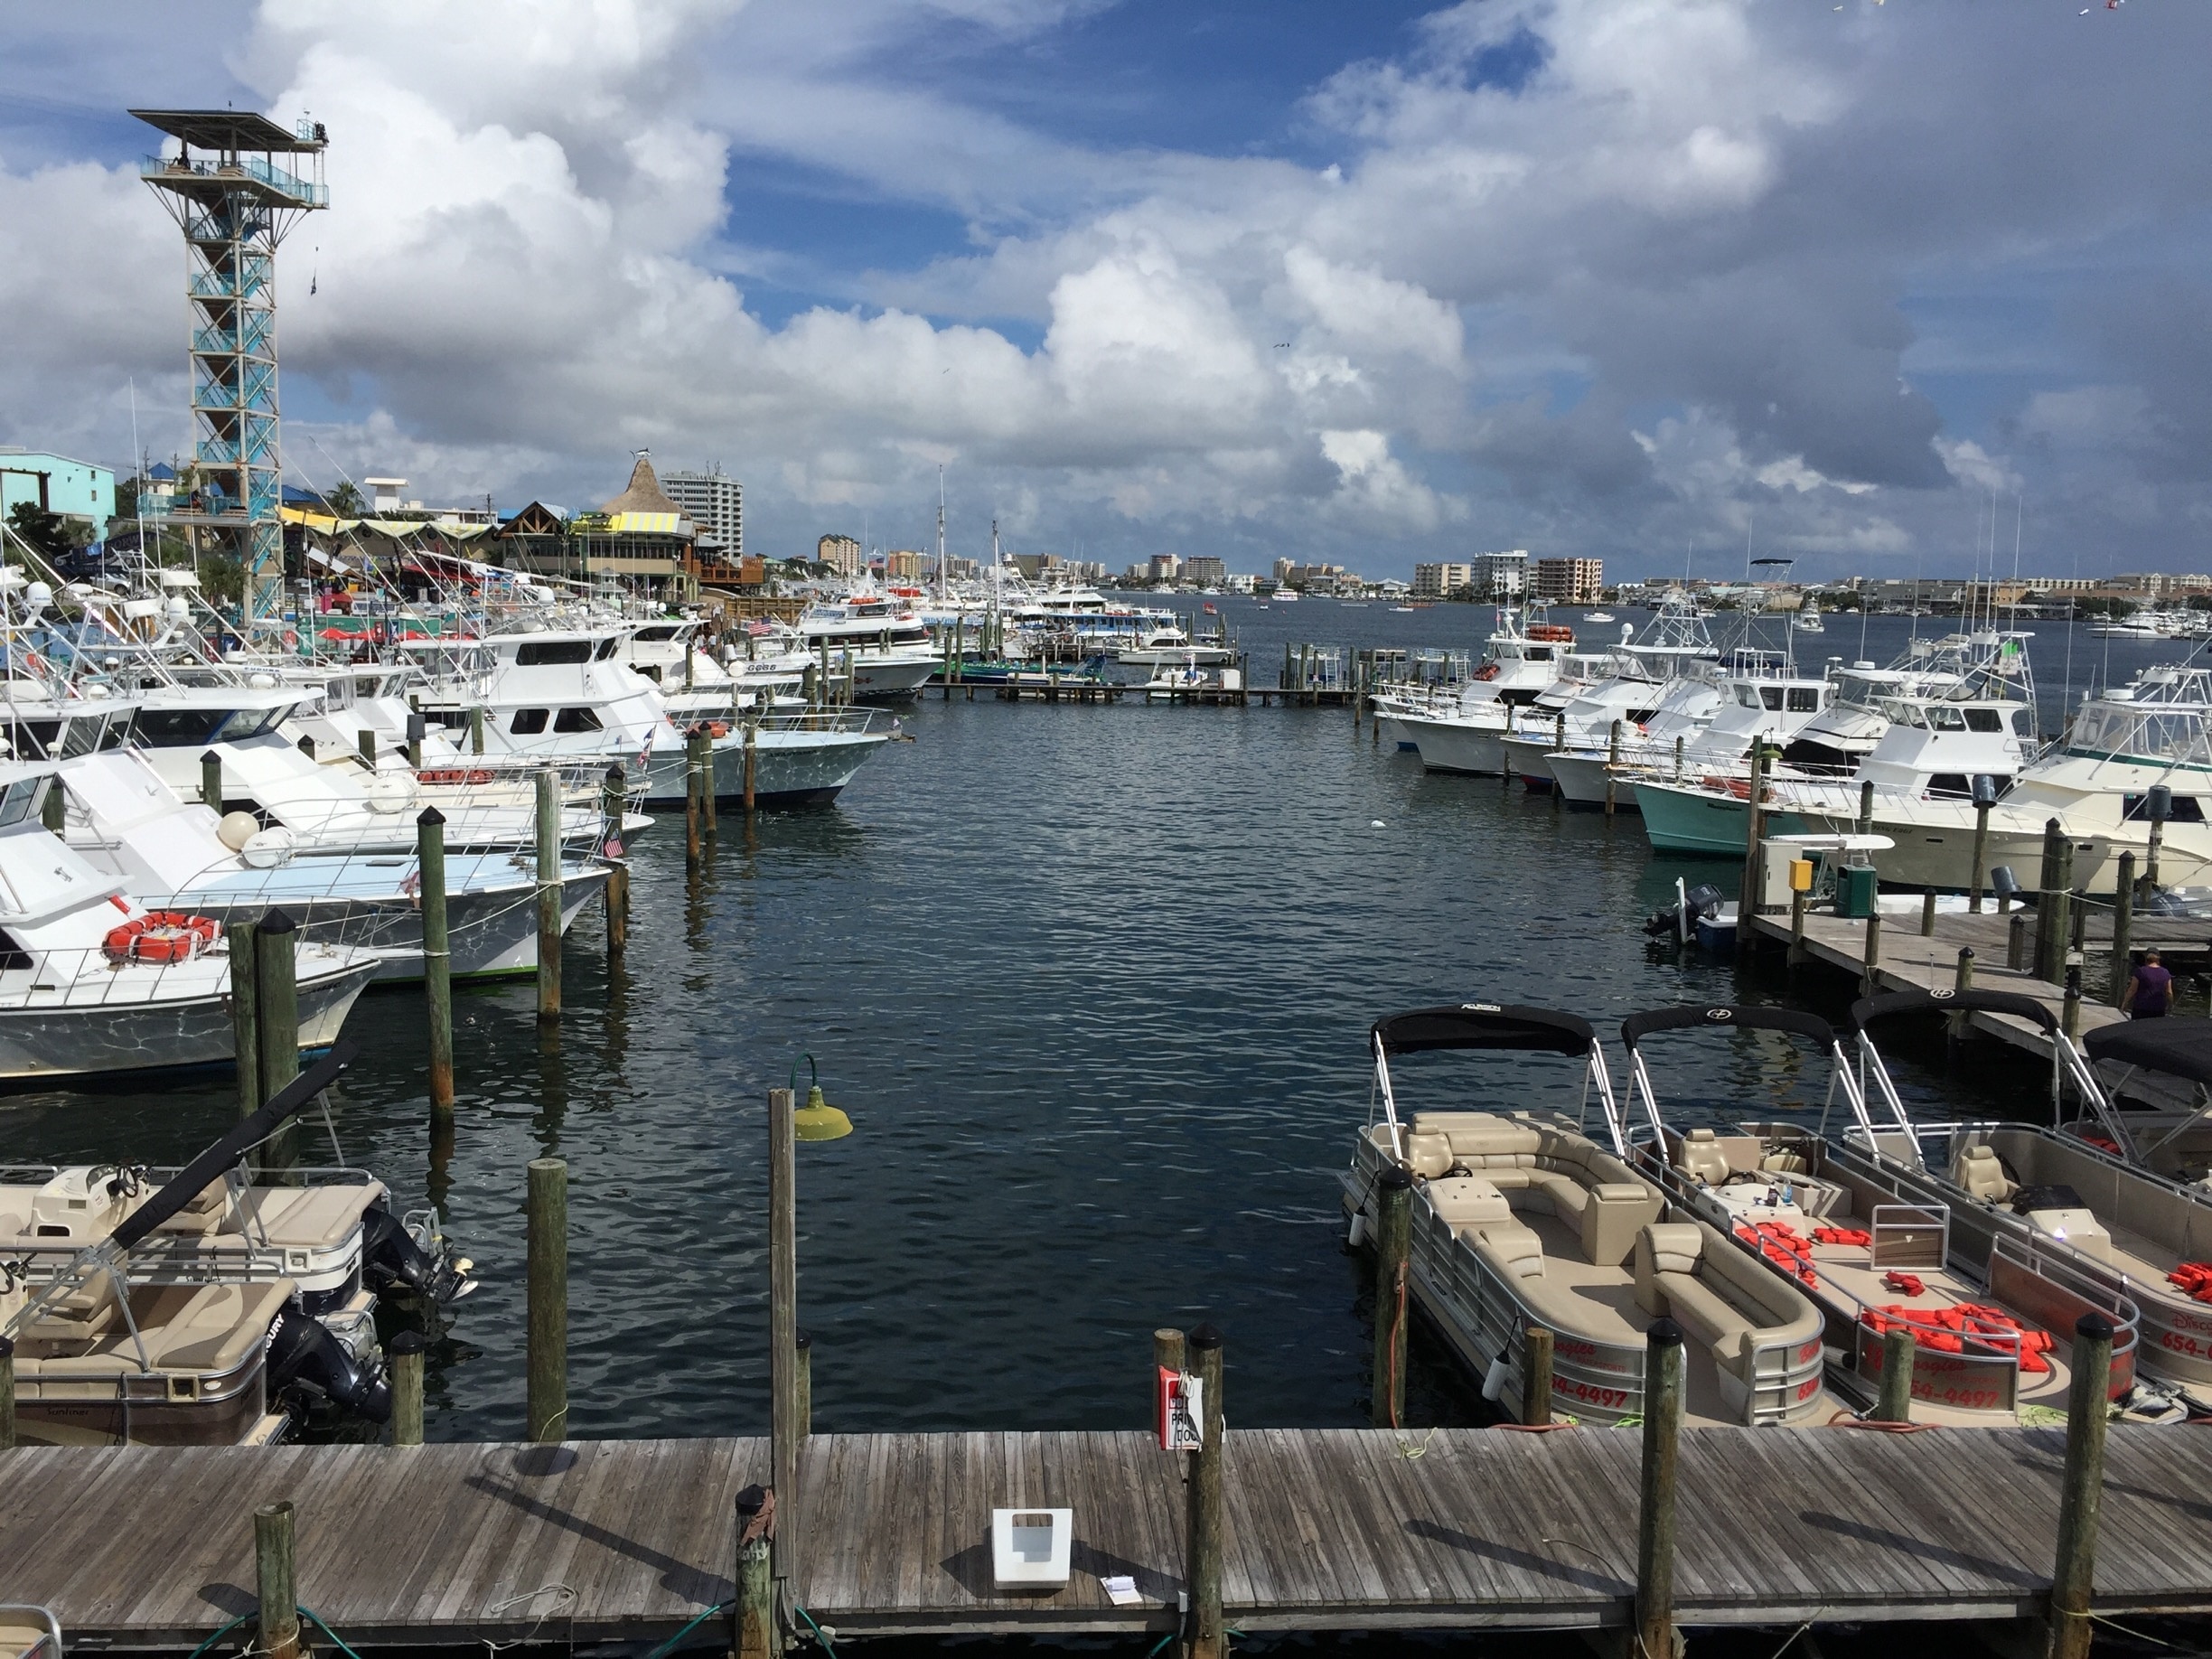 Destin harbor is a fun place to visit and see the daily catch come in or go out on a fishing trip